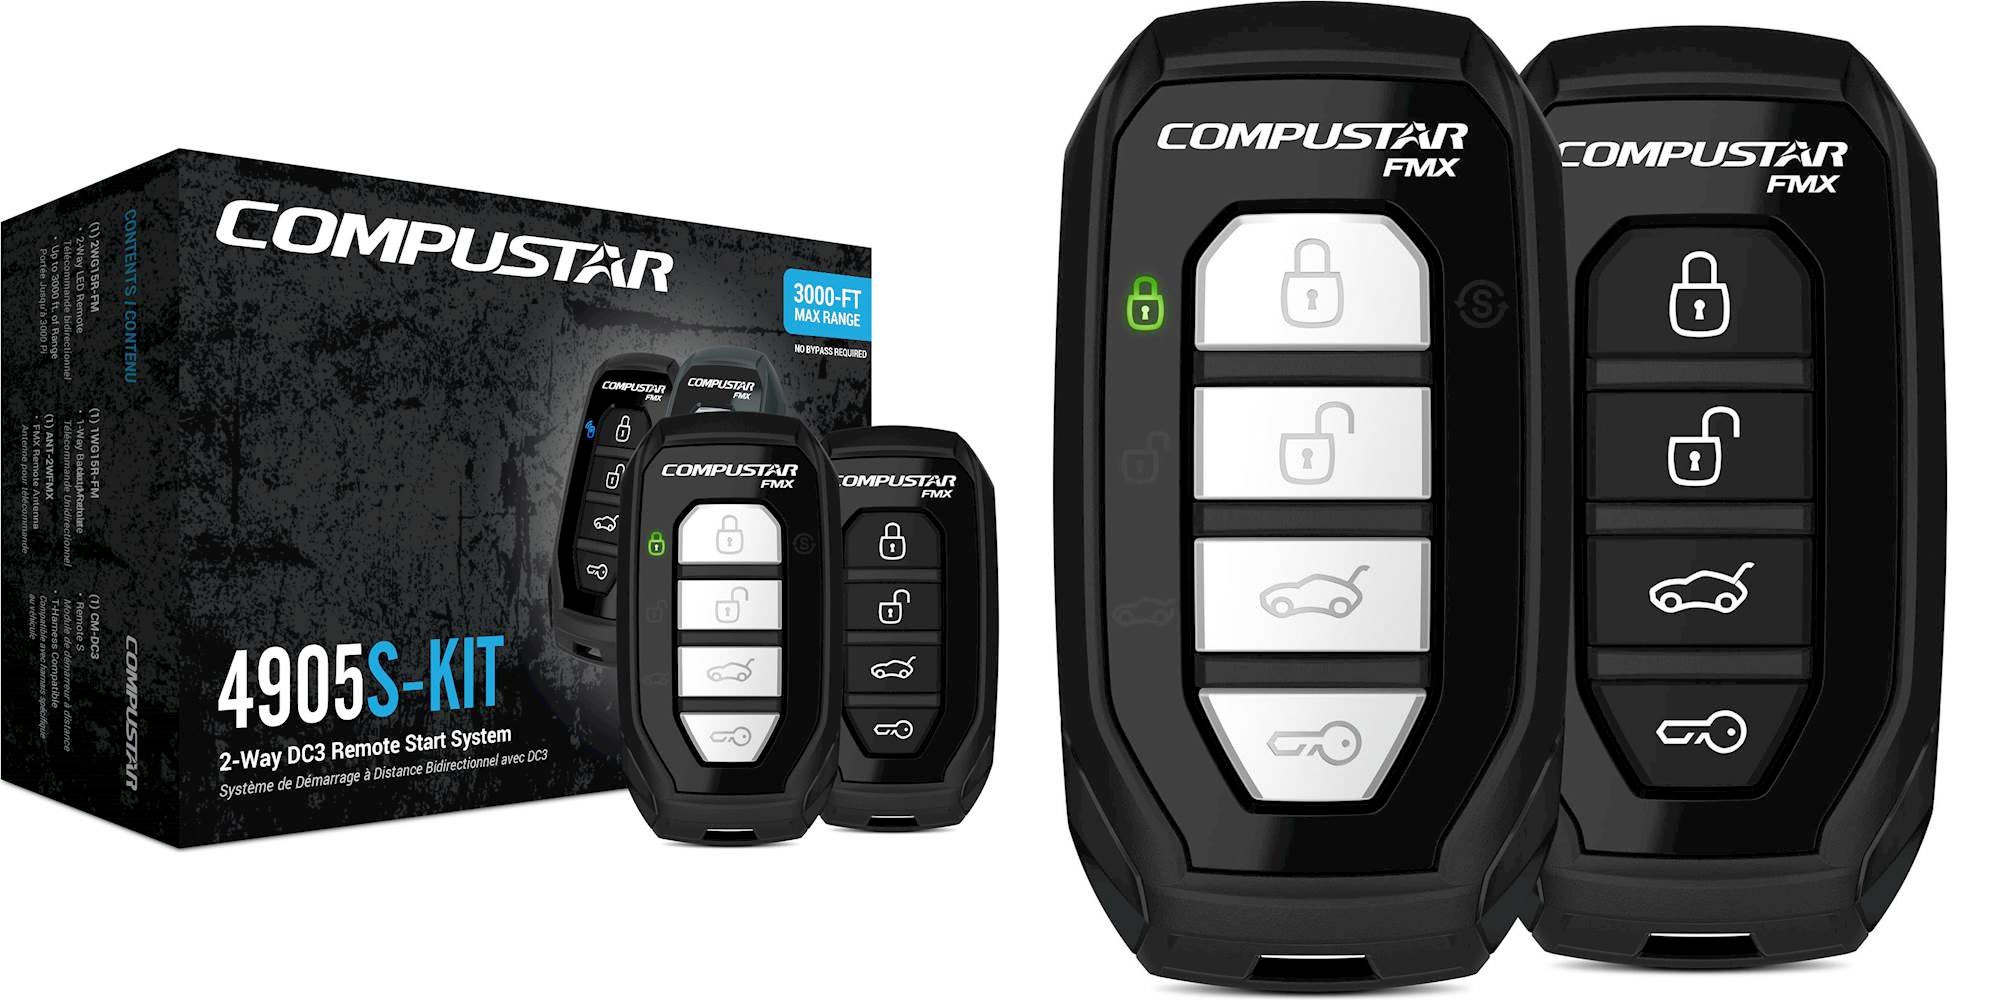 Never walk out to a cold car again w/ this Compustar remote start